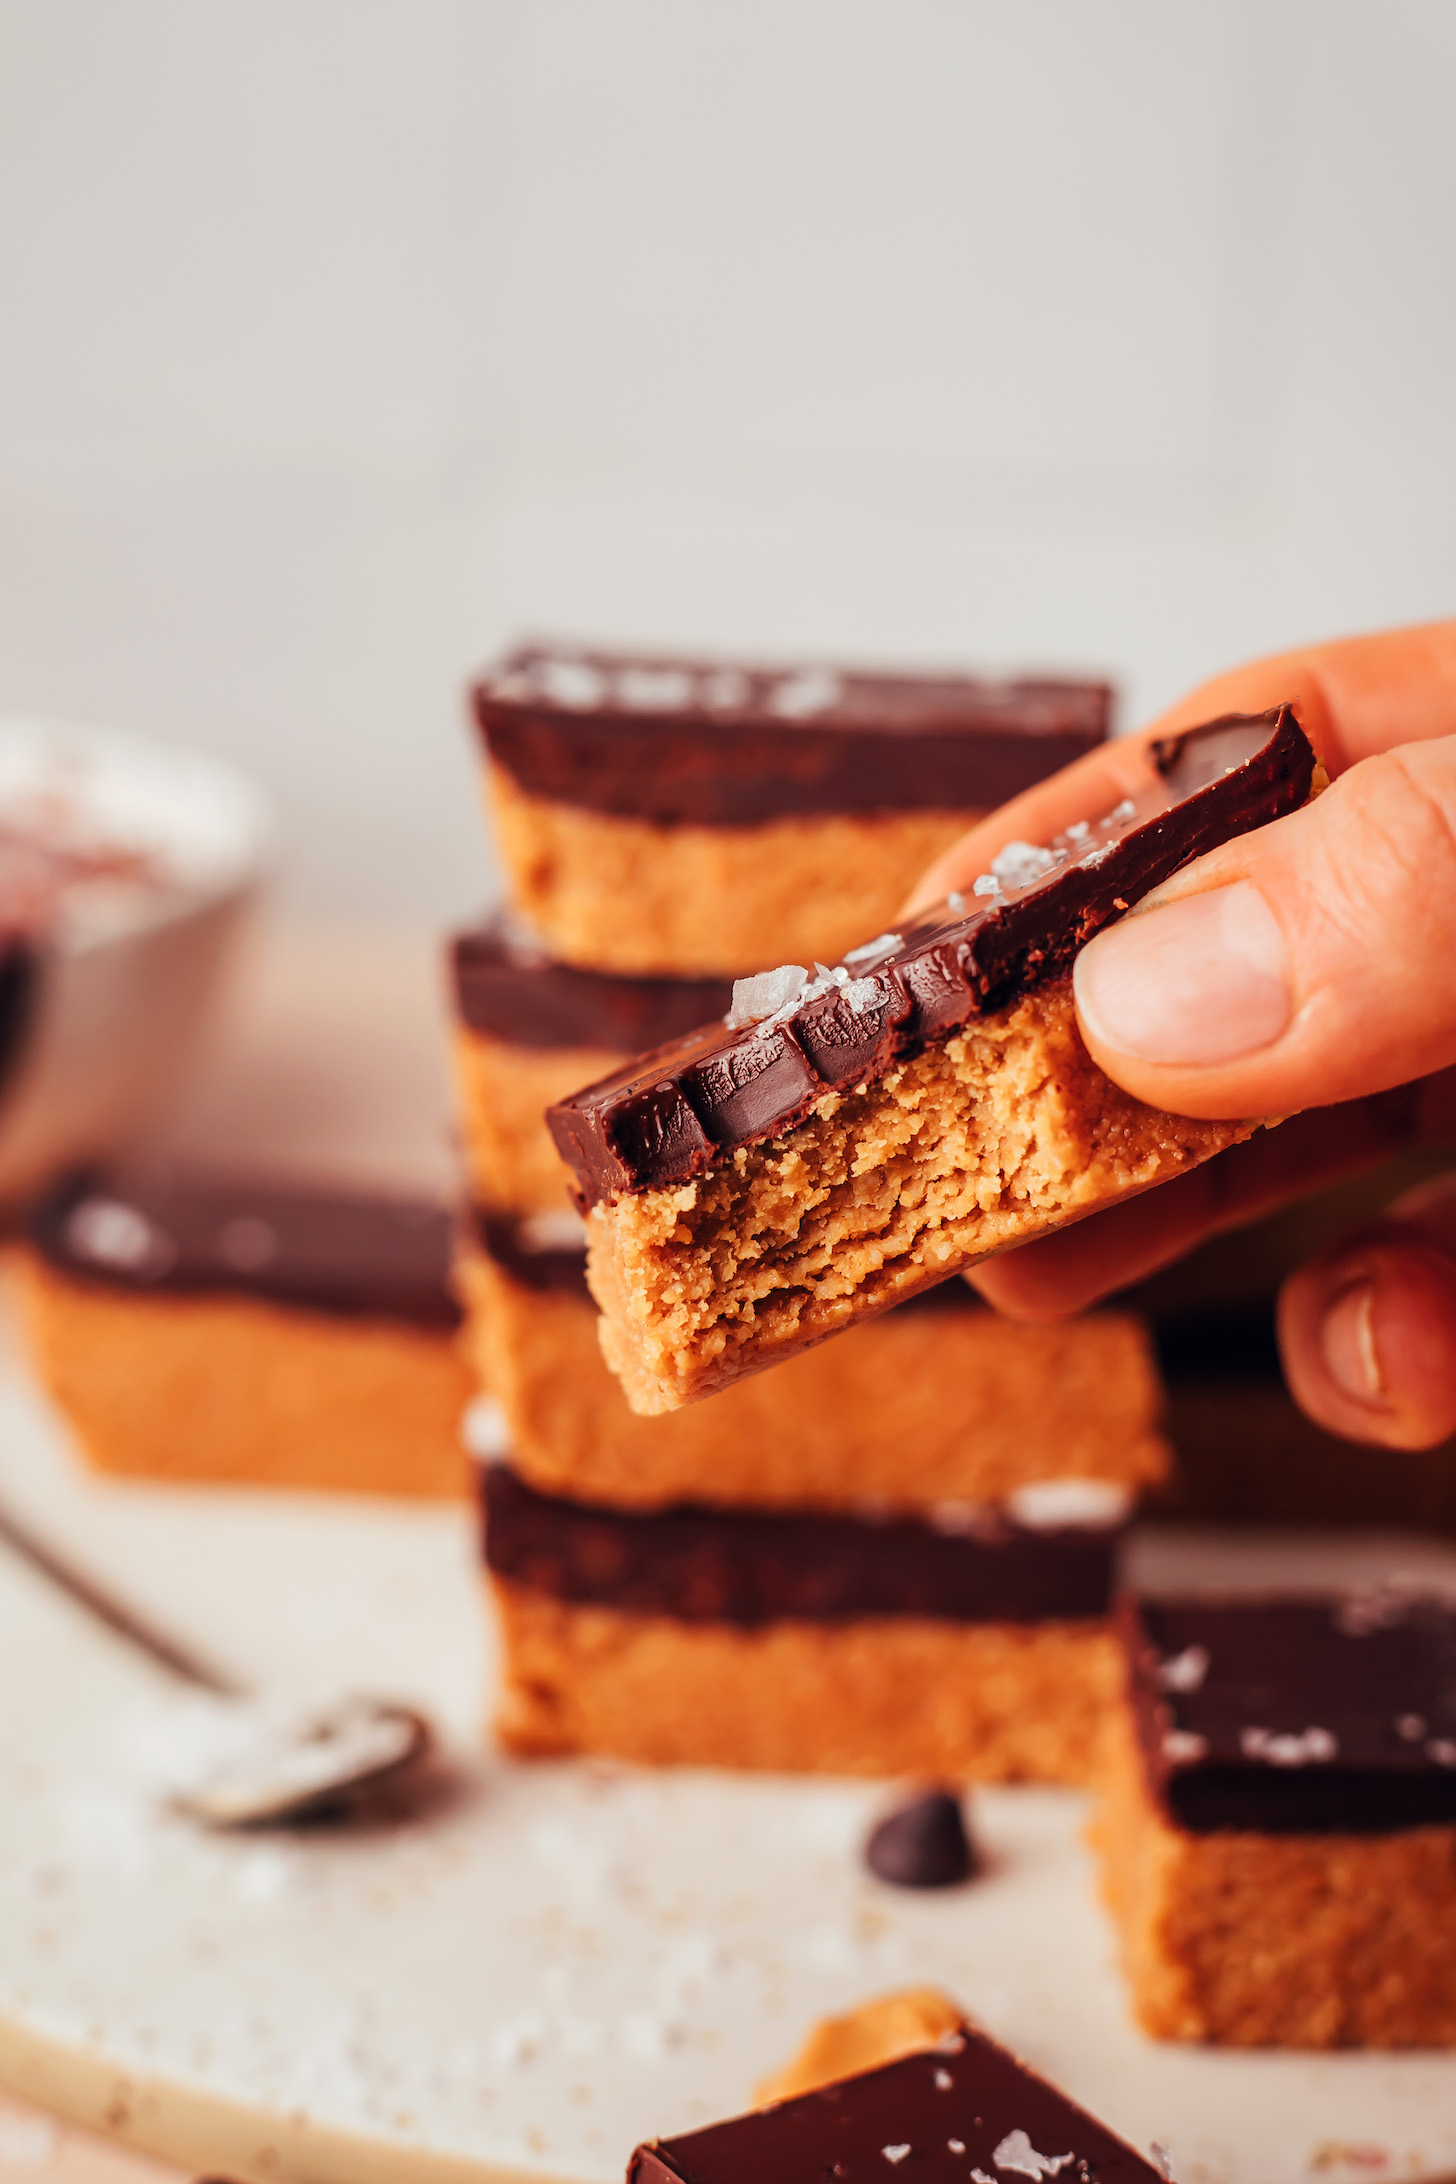 Holding a no-bake chocolate peanut butter cup bar topped with flaky salt